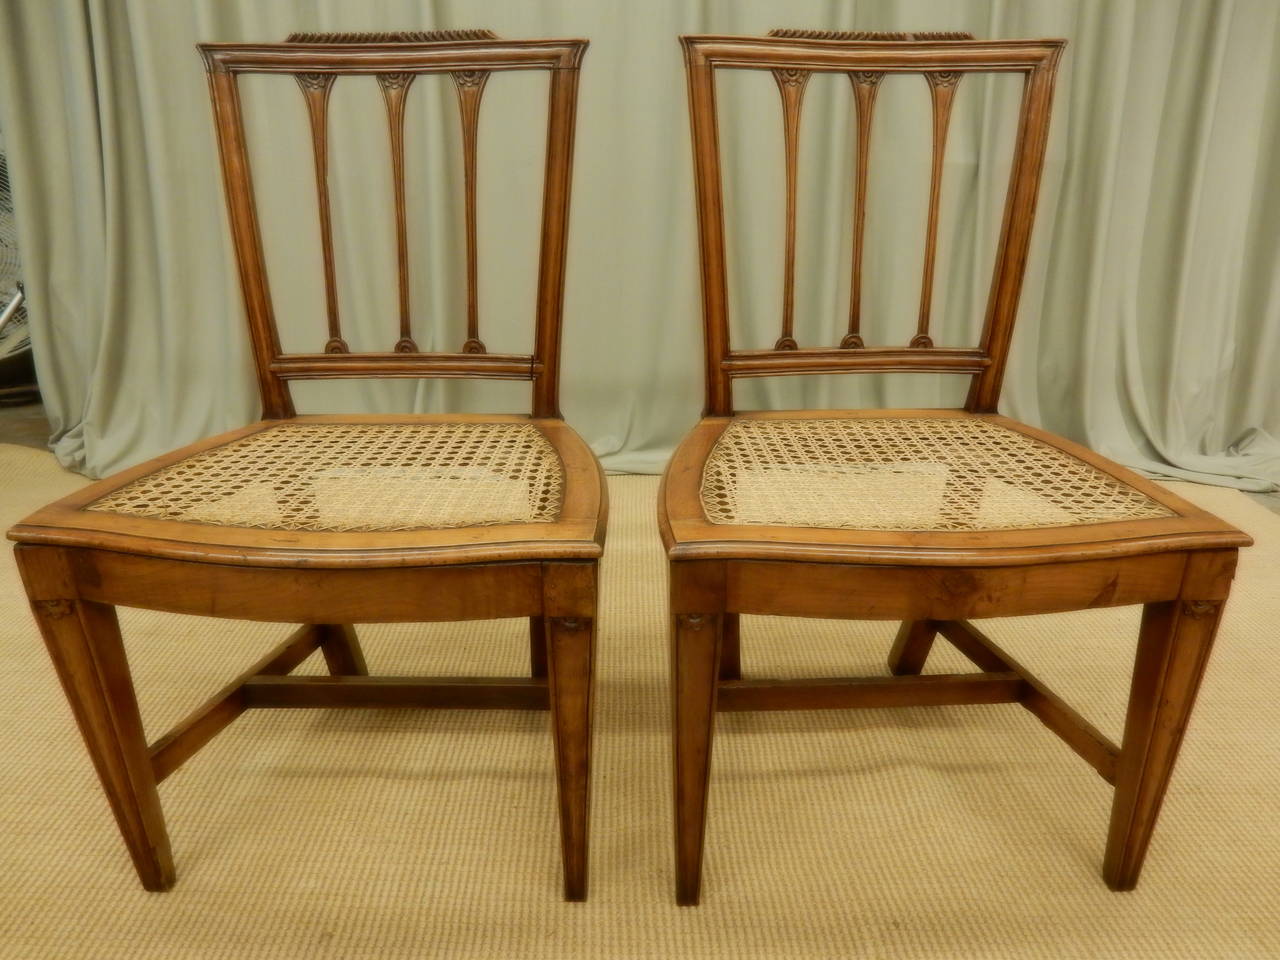 Carefully restored 19th century walnut Italian carved dining chairs. Chairs need cushions on the canned seats.